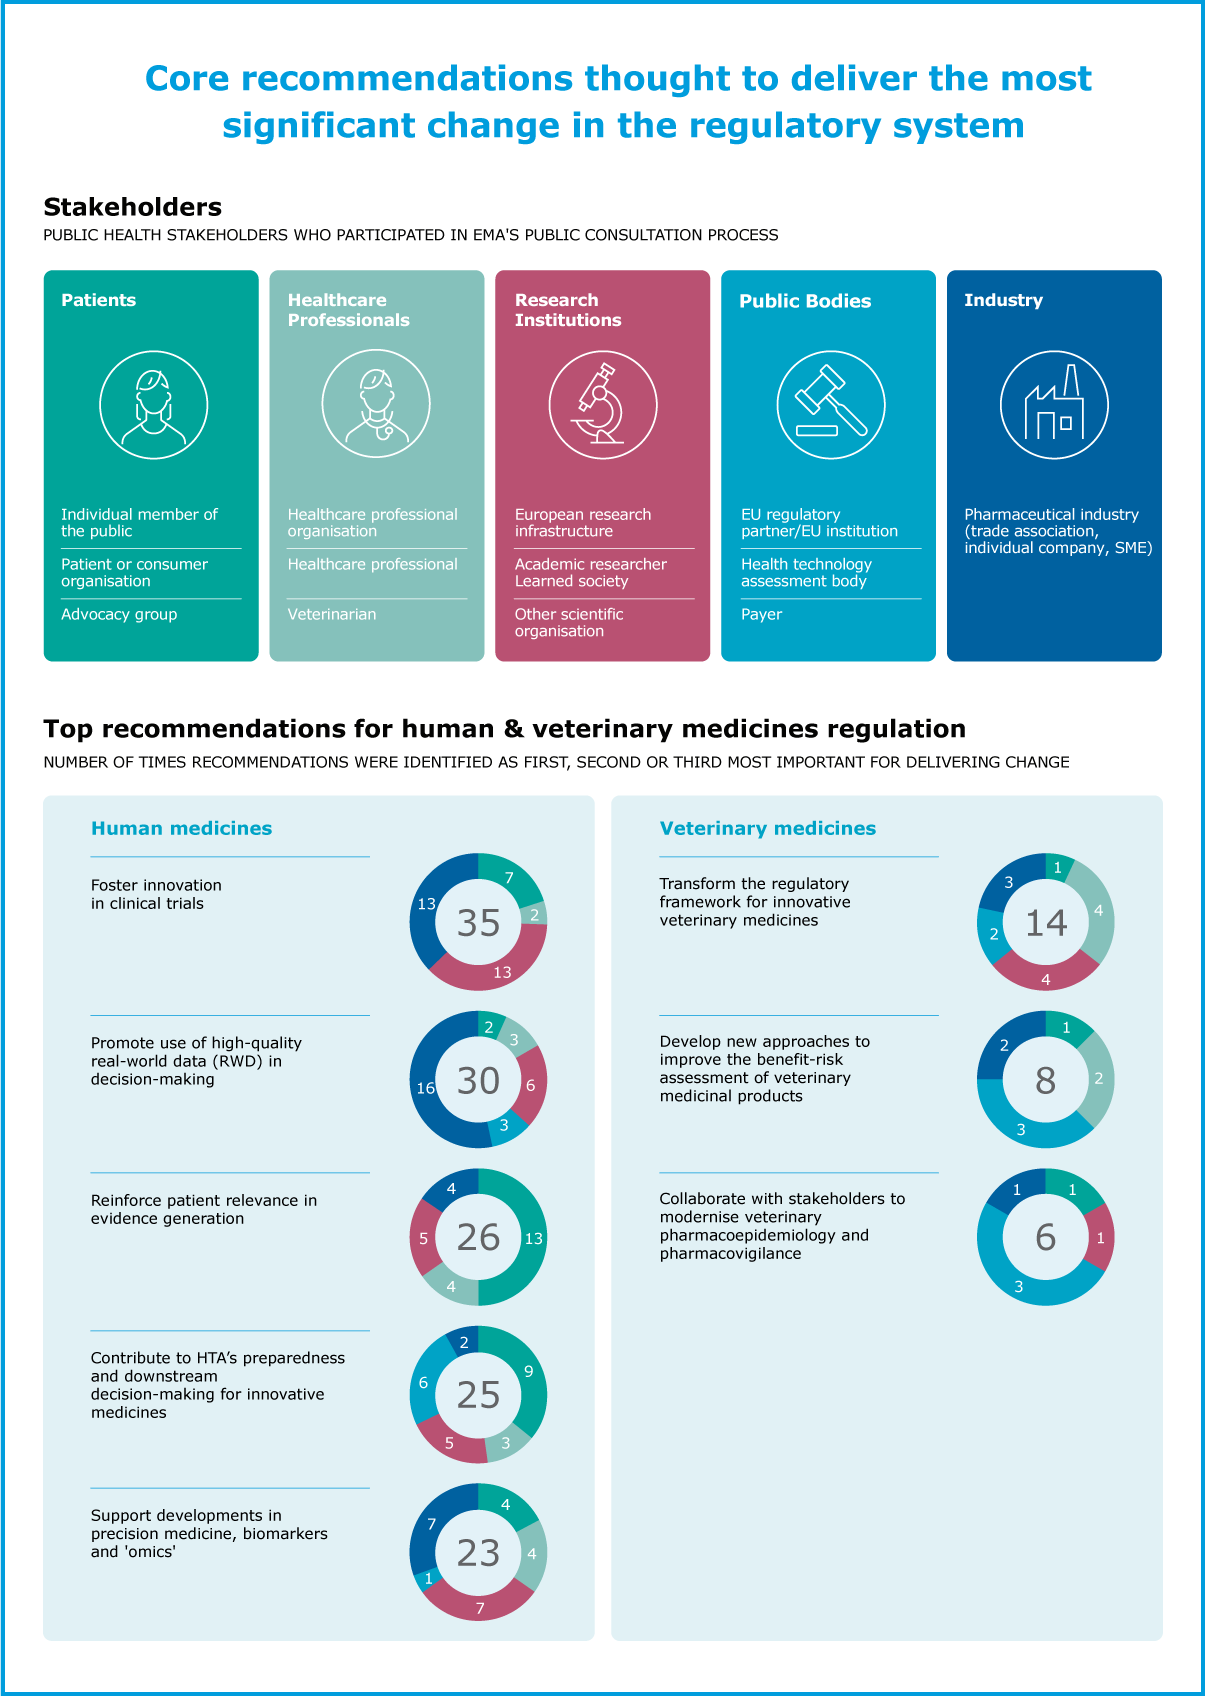 Core recommendations thought to deliver the most significant change in the regulatory system